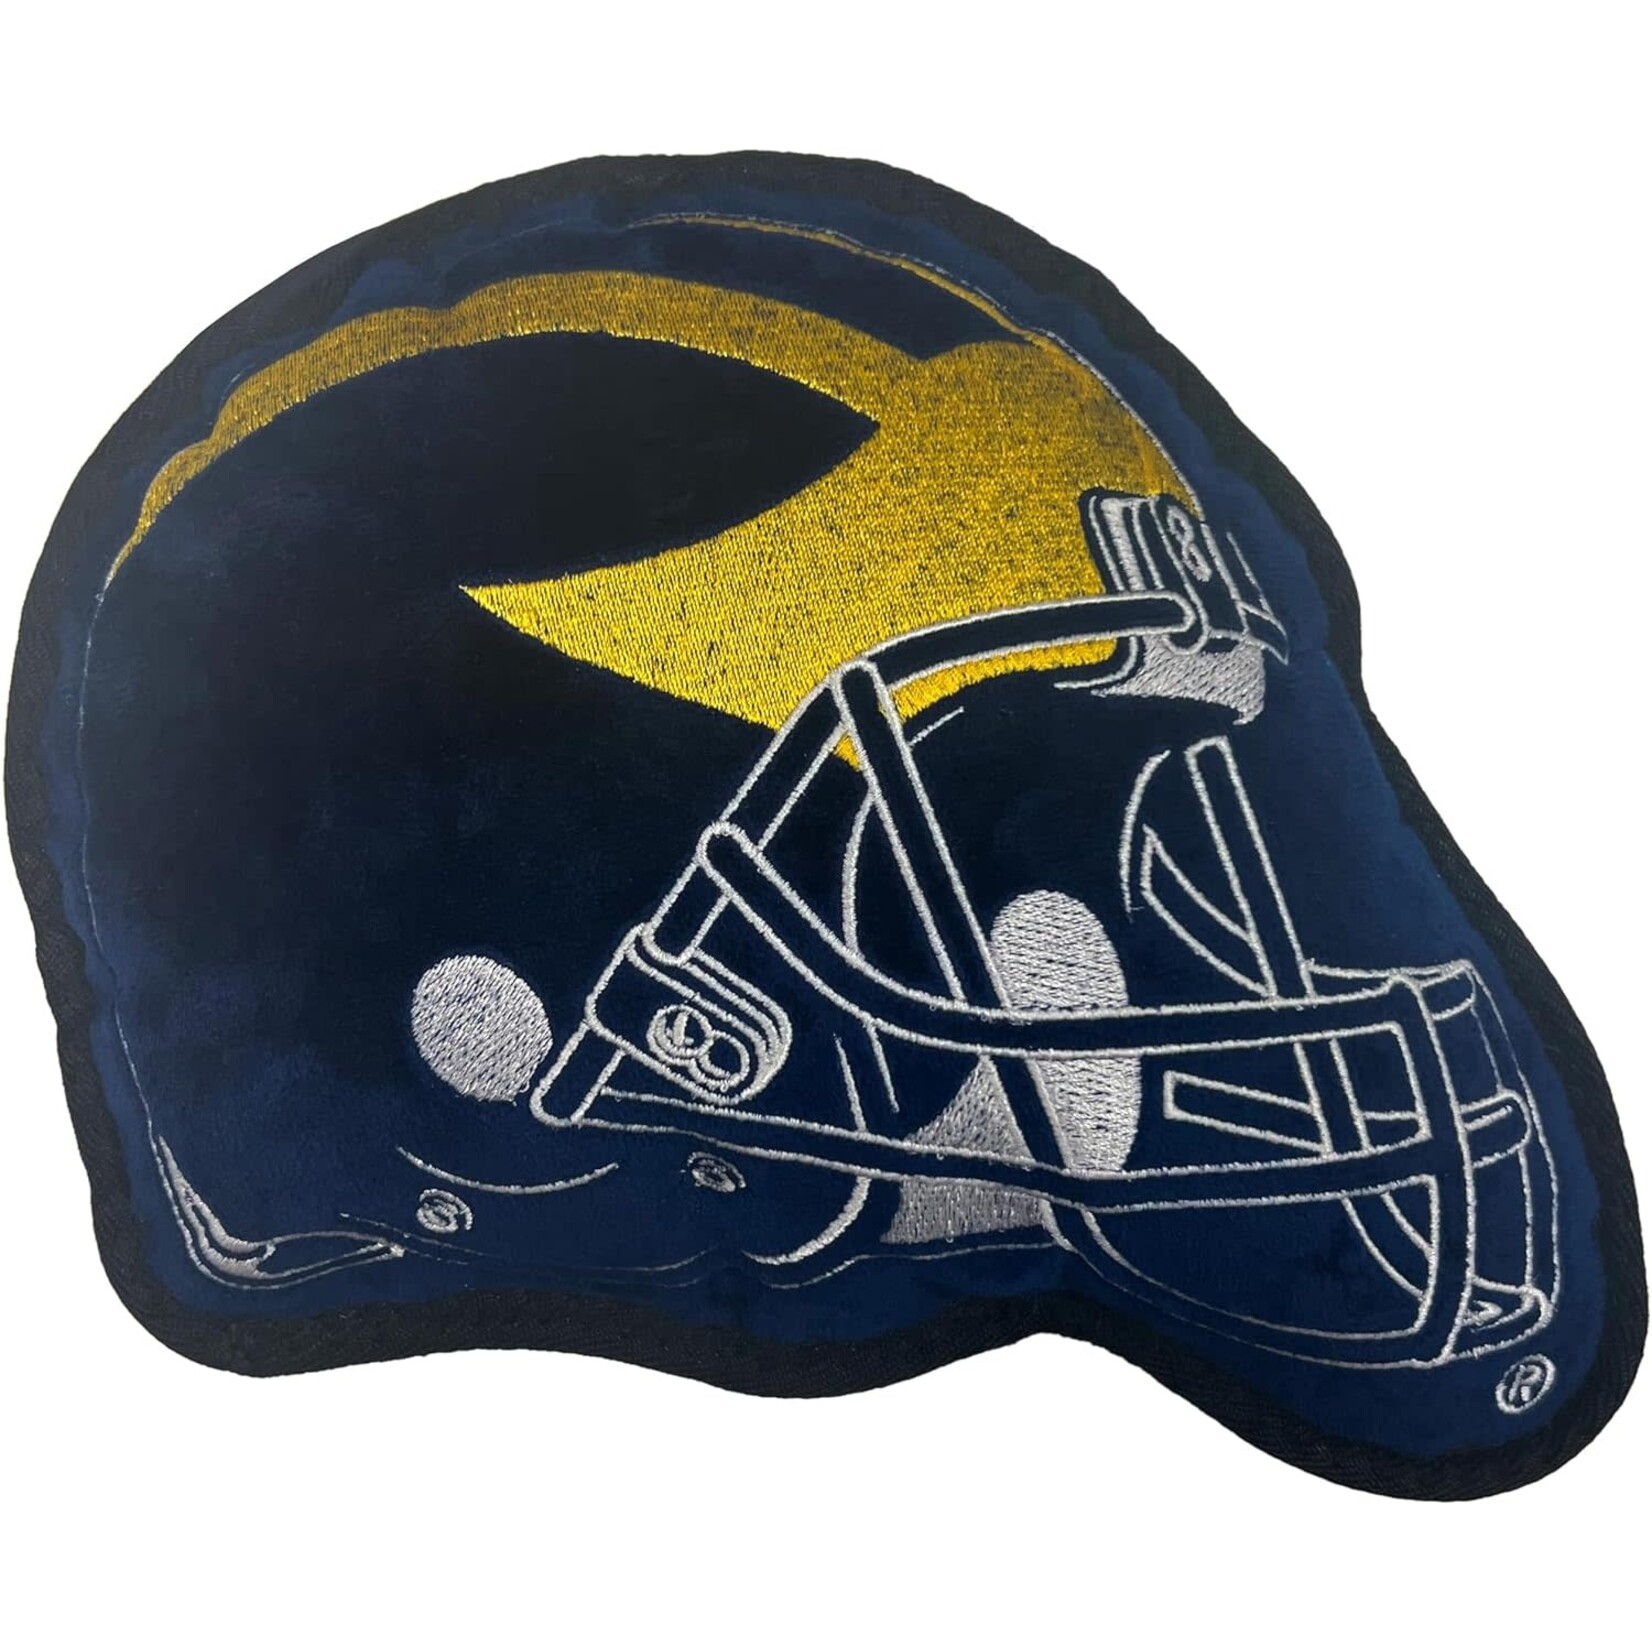 Pets First Inc NCAA Michigan Wolverines Helmet  - Tough Toy